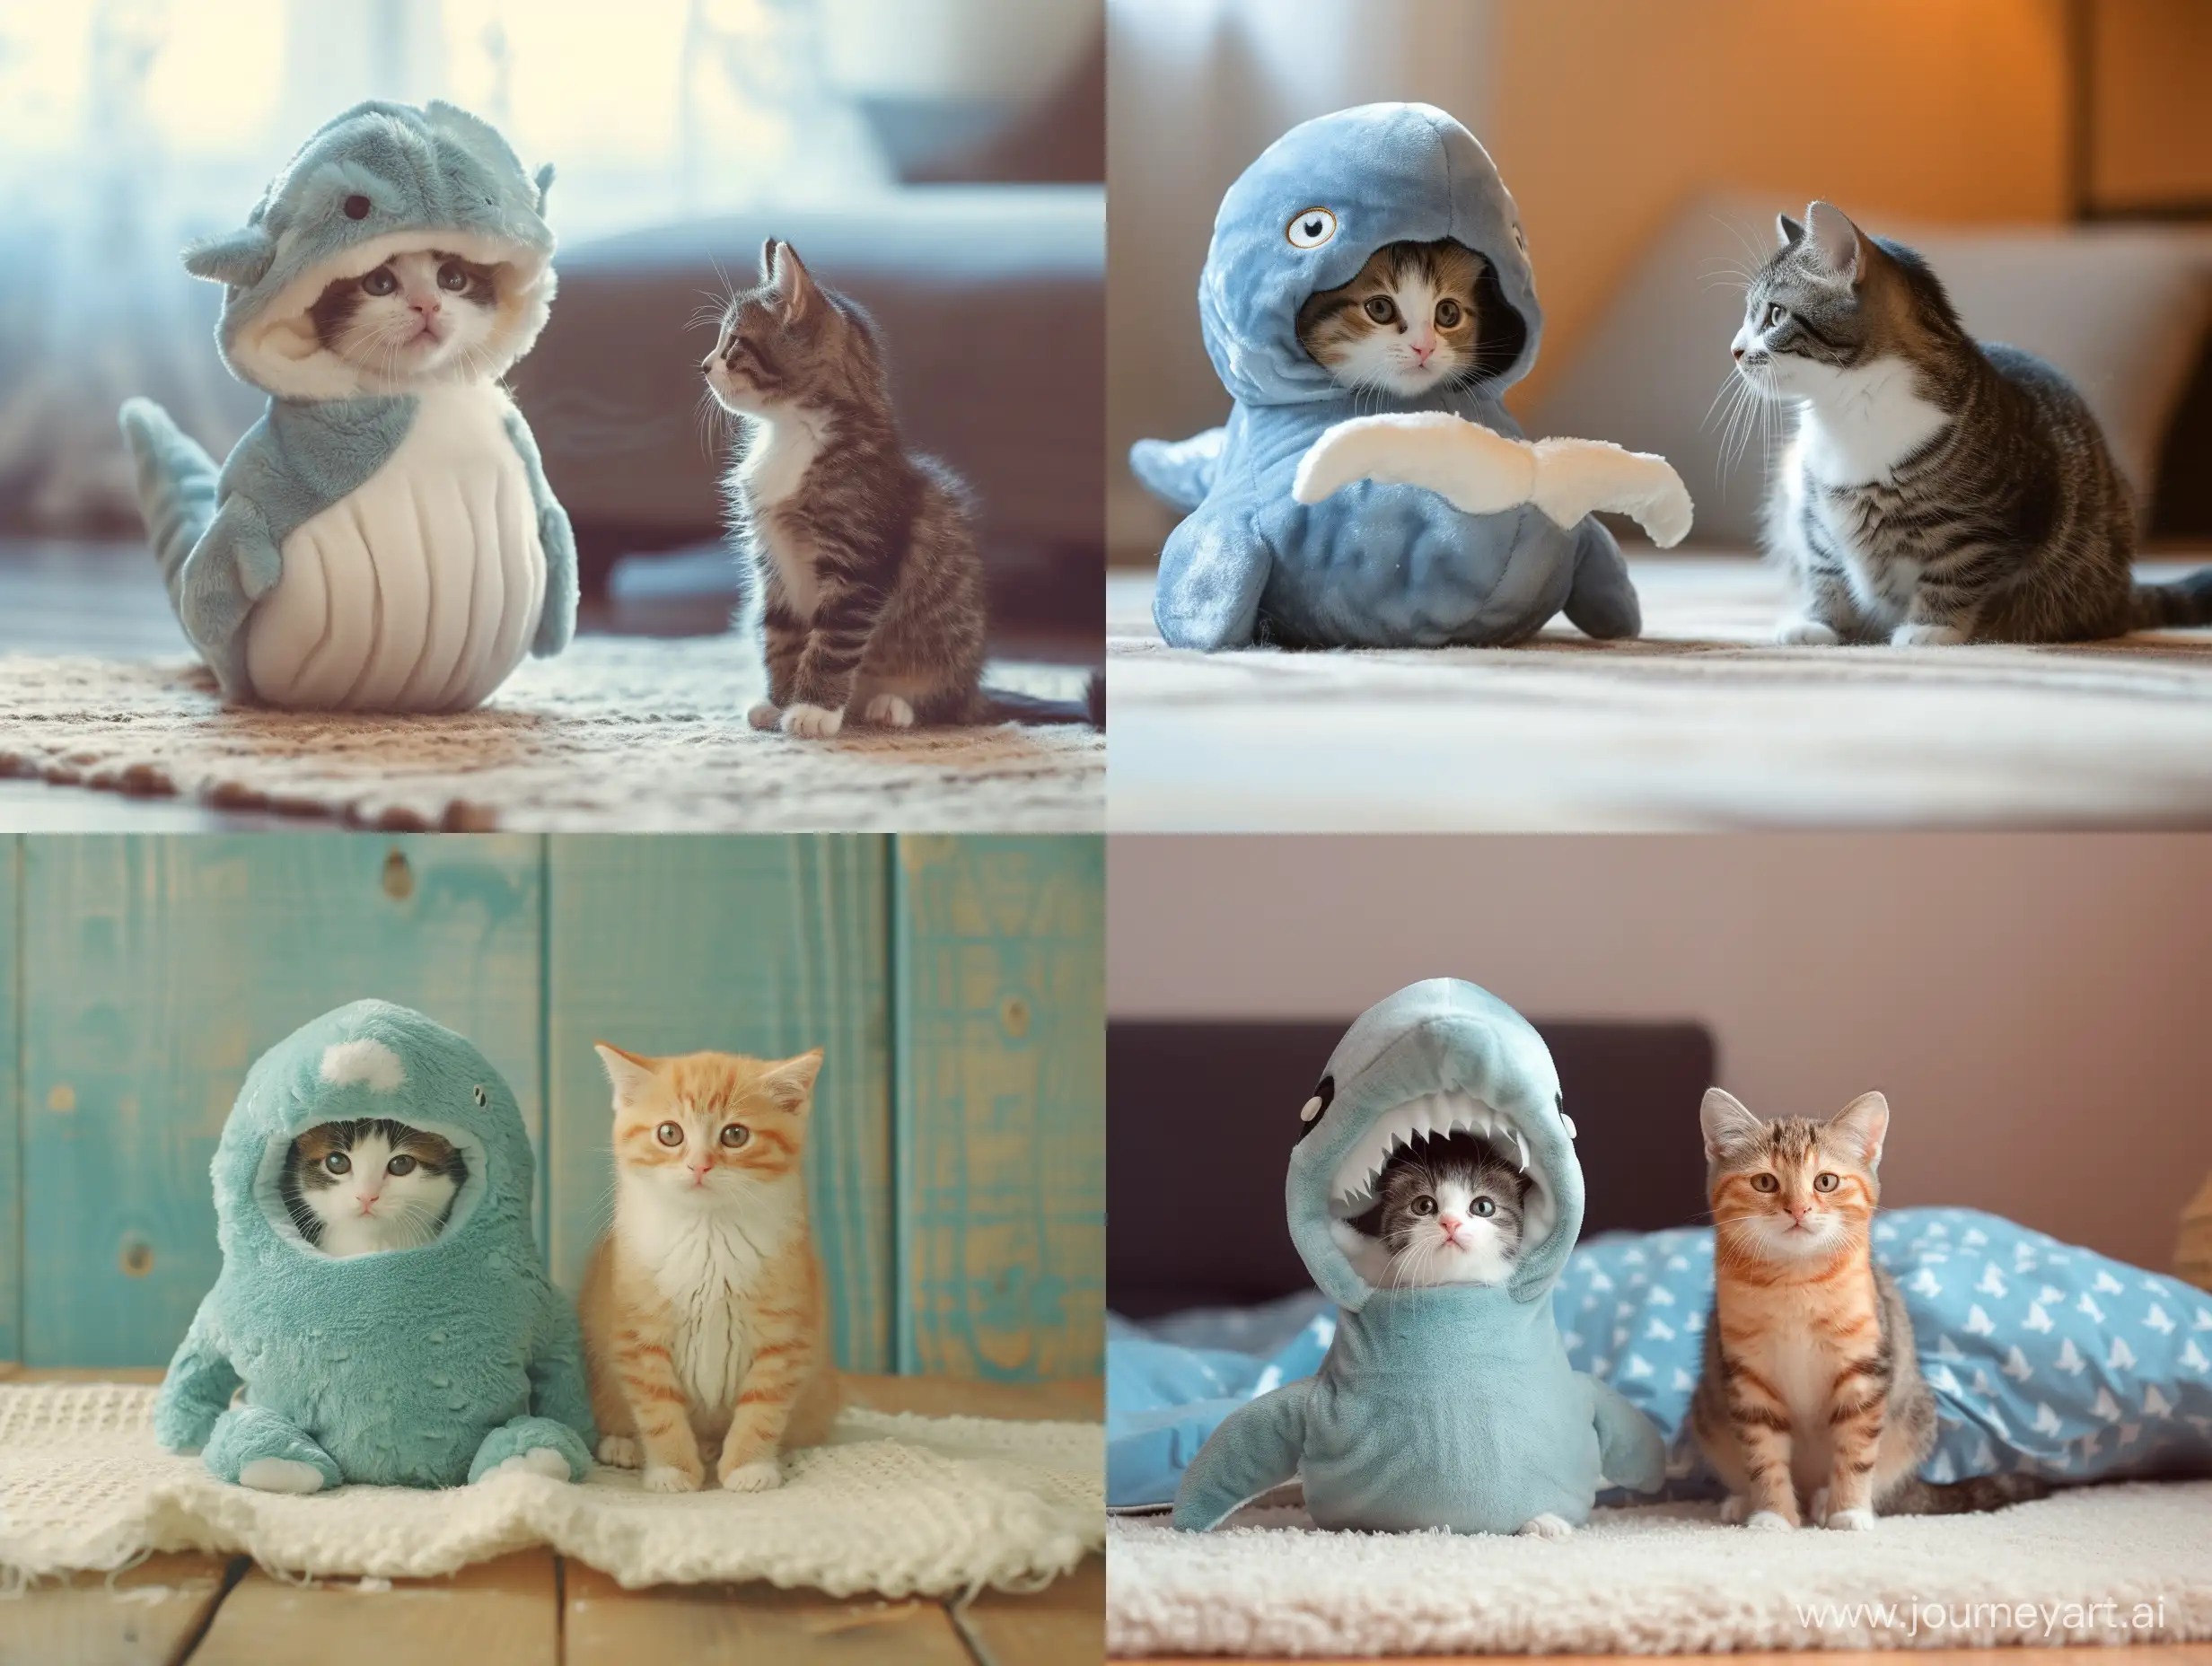 Adorable-Kitten-in-Whale-Costume-Captures-Feline-Affection